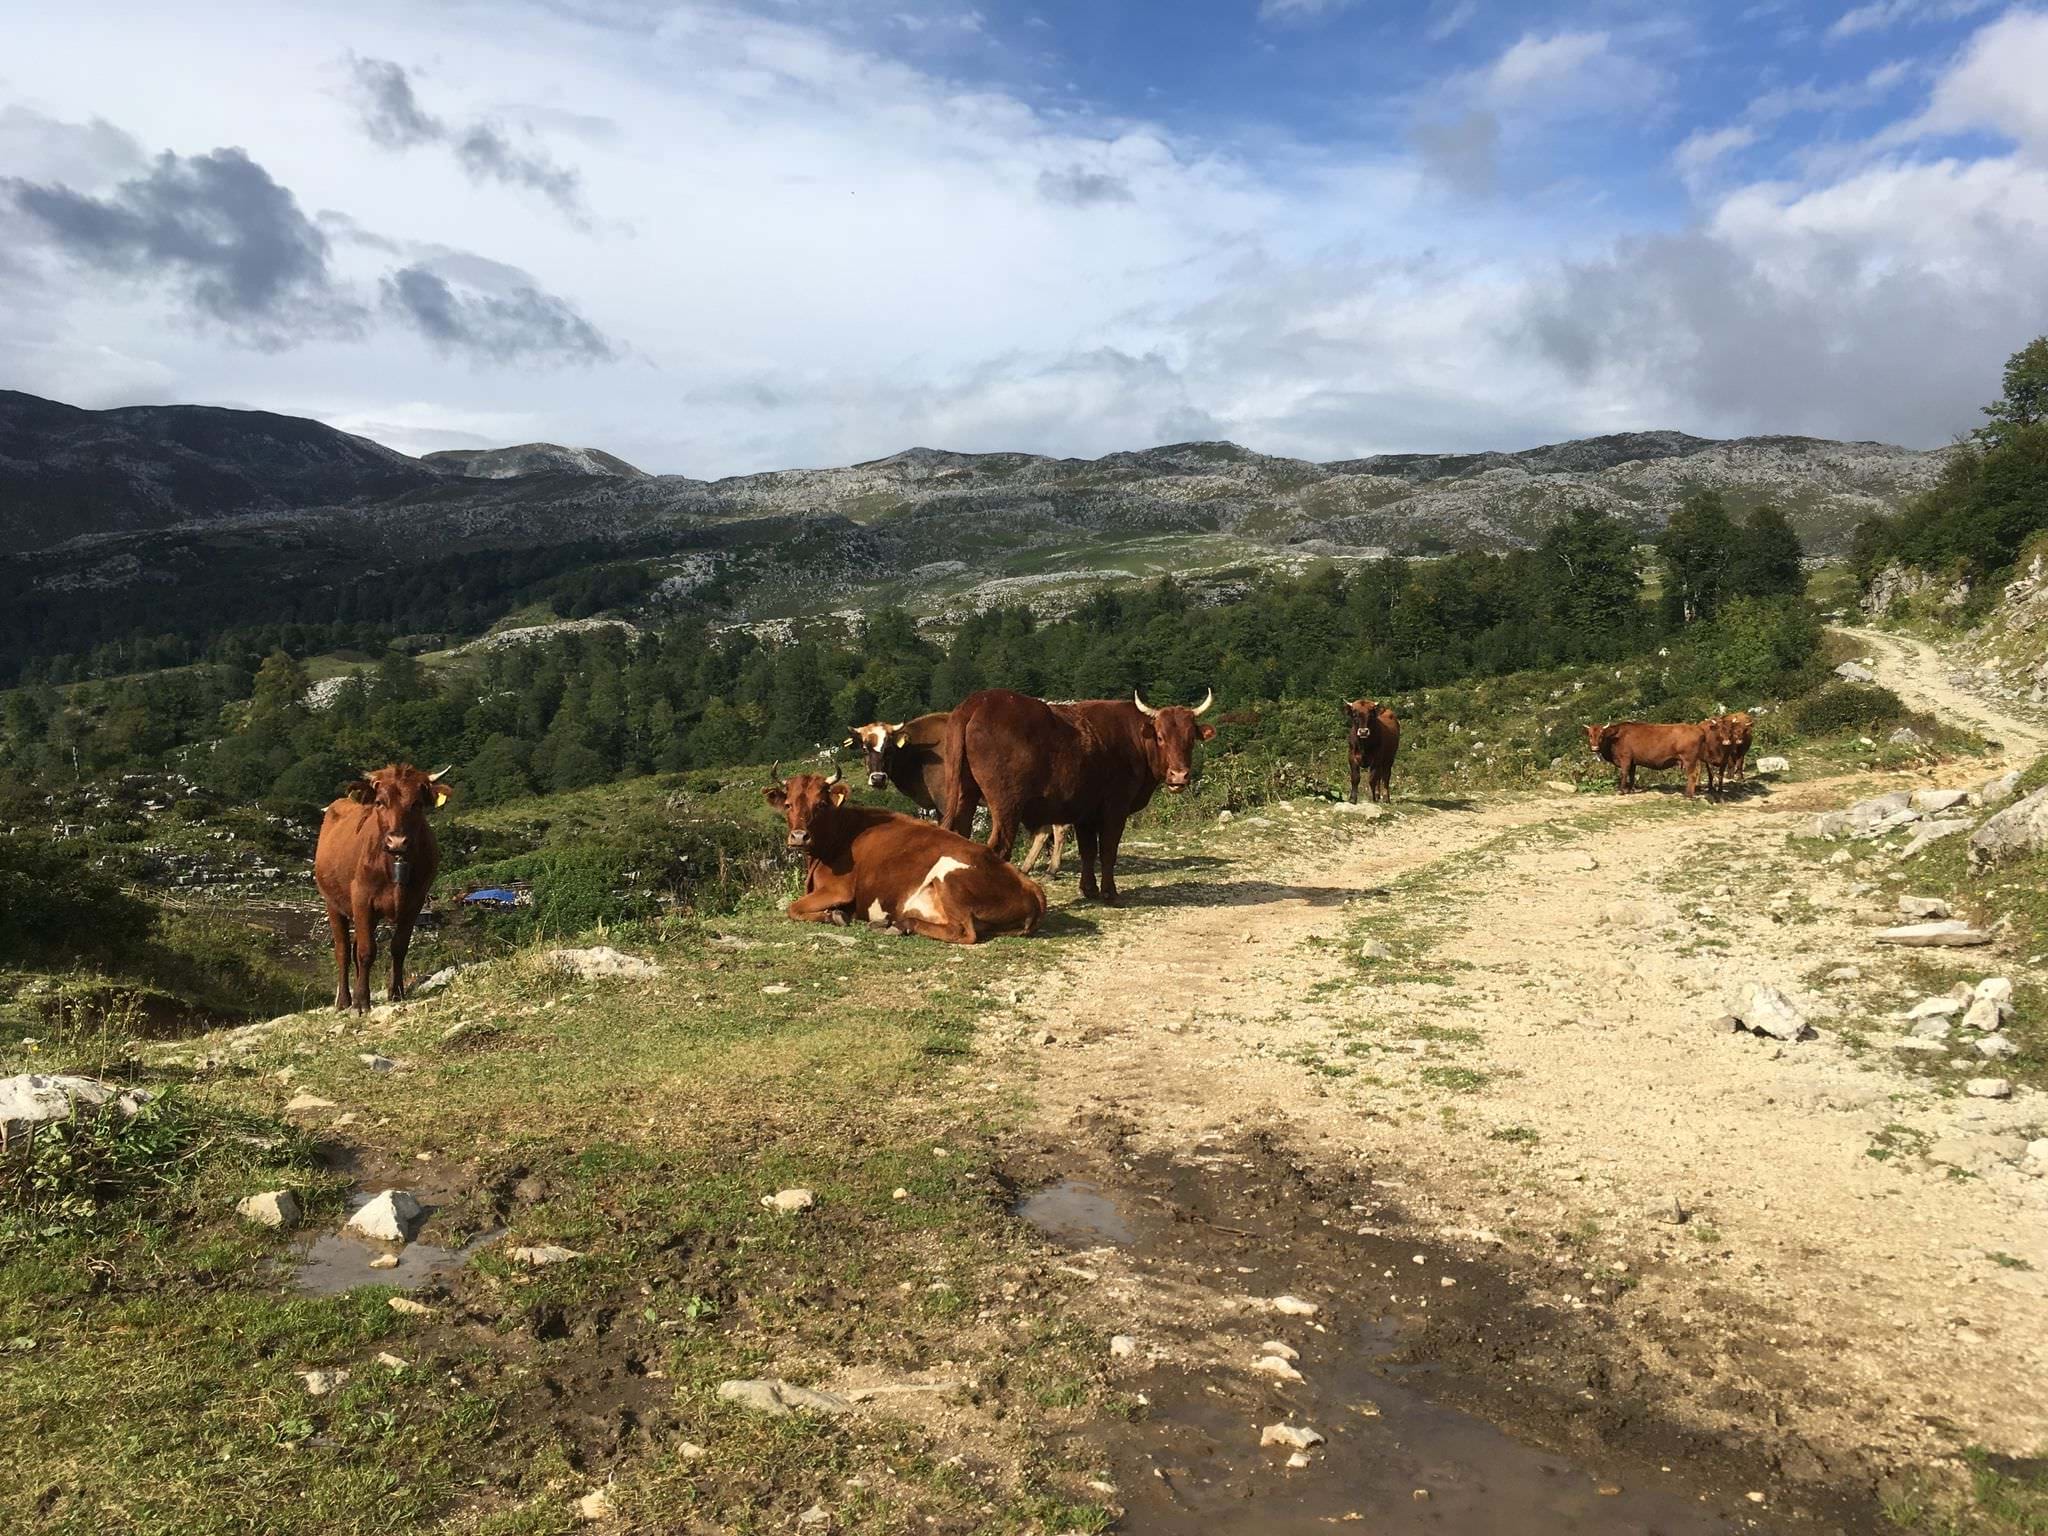 Cows en route to the Askhi massif